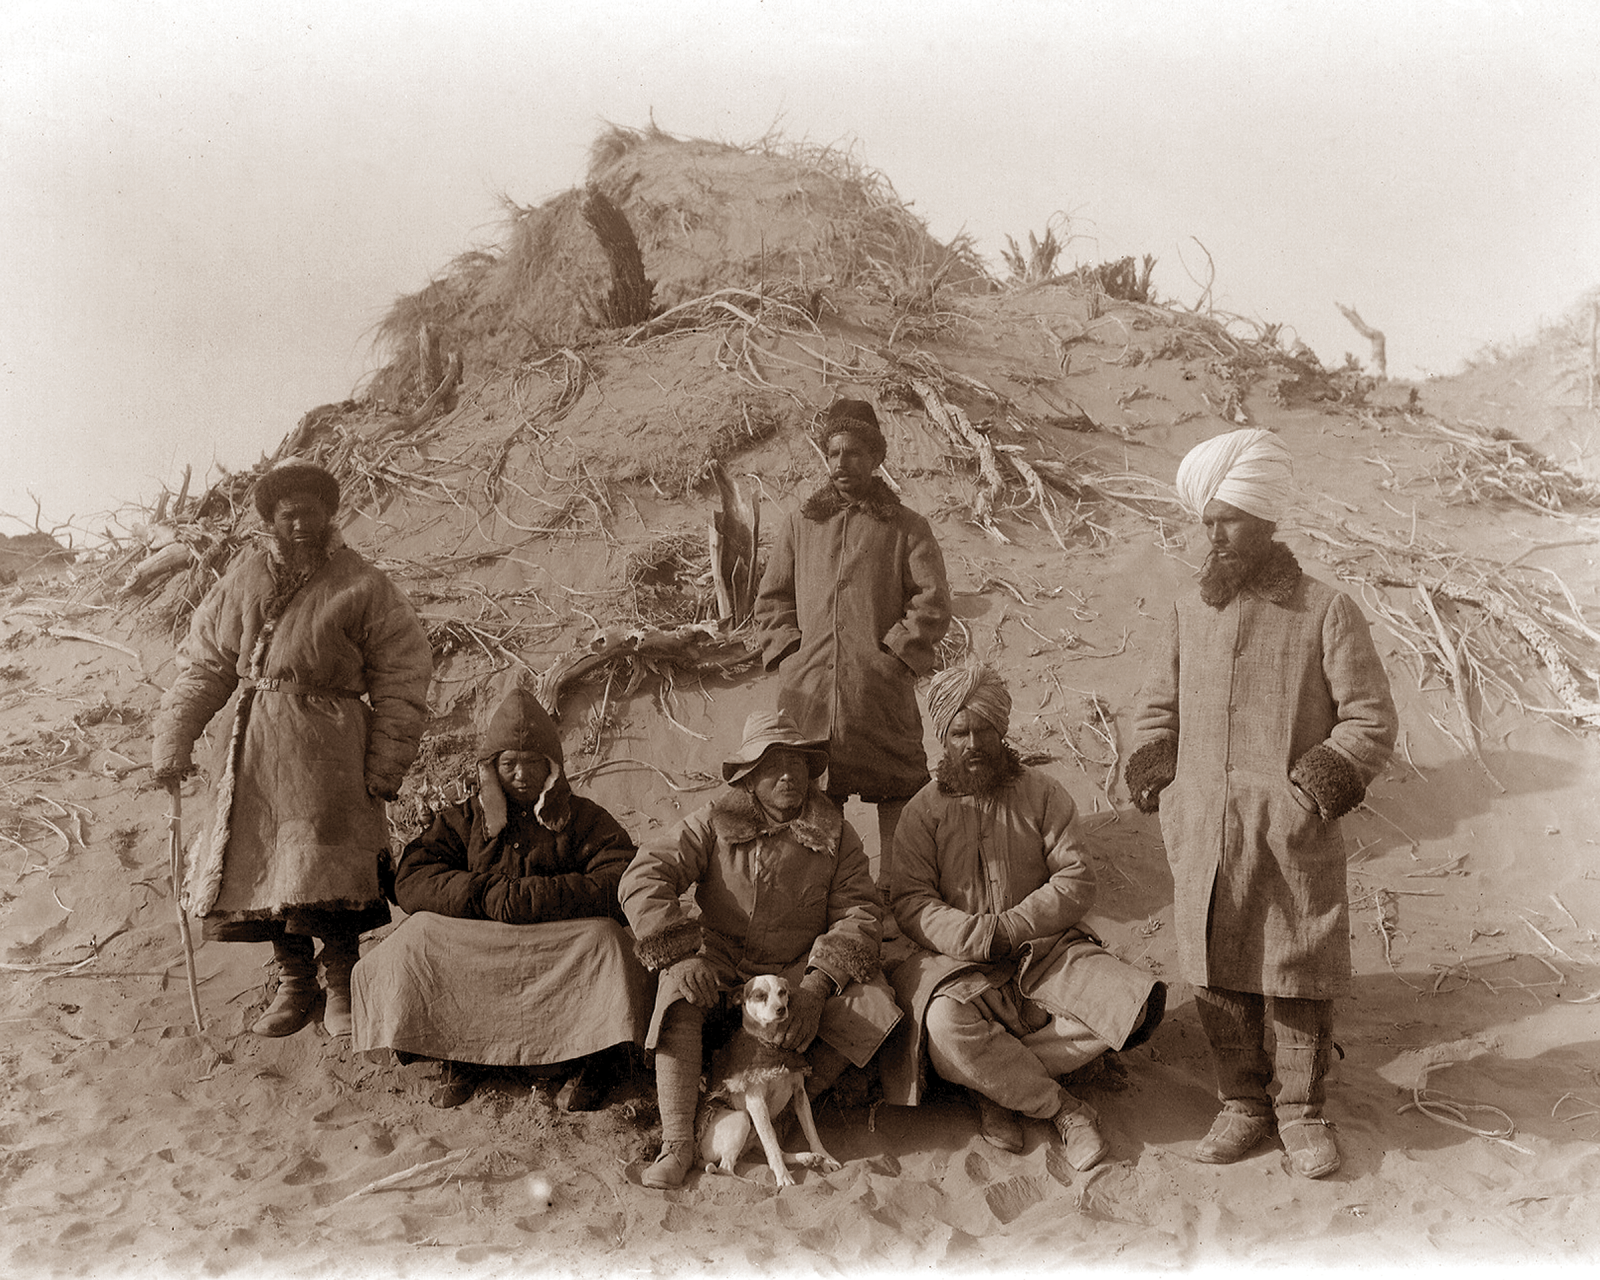 Photograph of Stein and assistants at Ulugh-Mazar in present-day China. Behind them is the rocky and desert landscape of Central Asia.